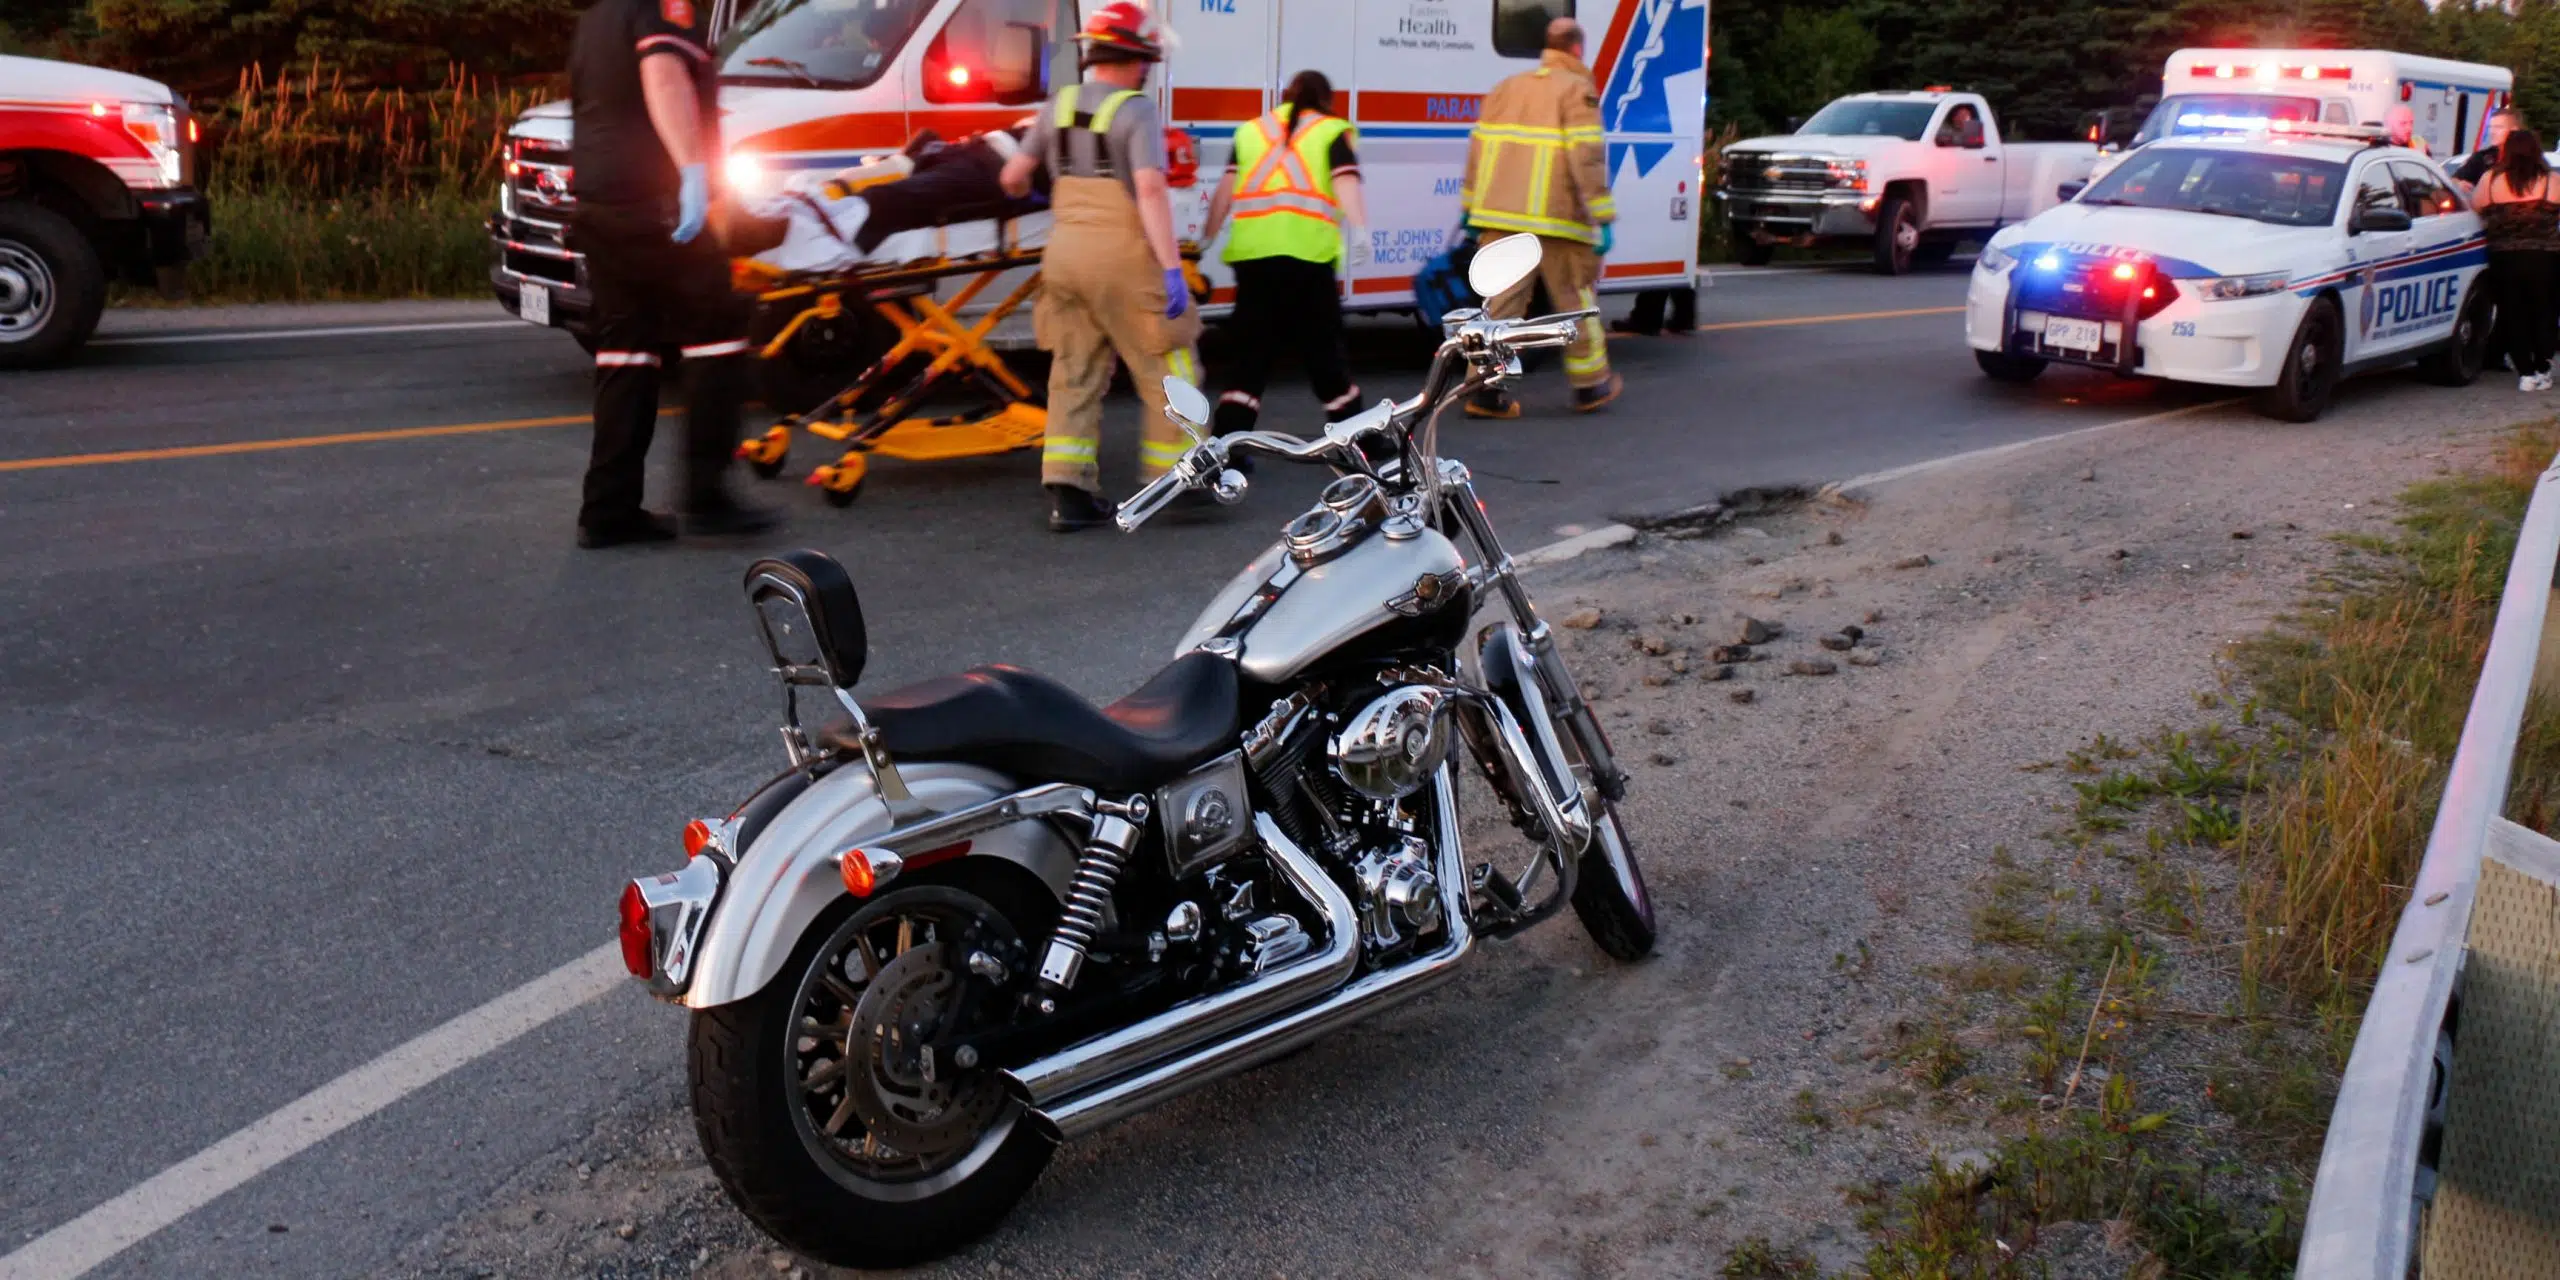 Motorcycle Rider Injured Following Collision in Portugal Cove-St. Philip's